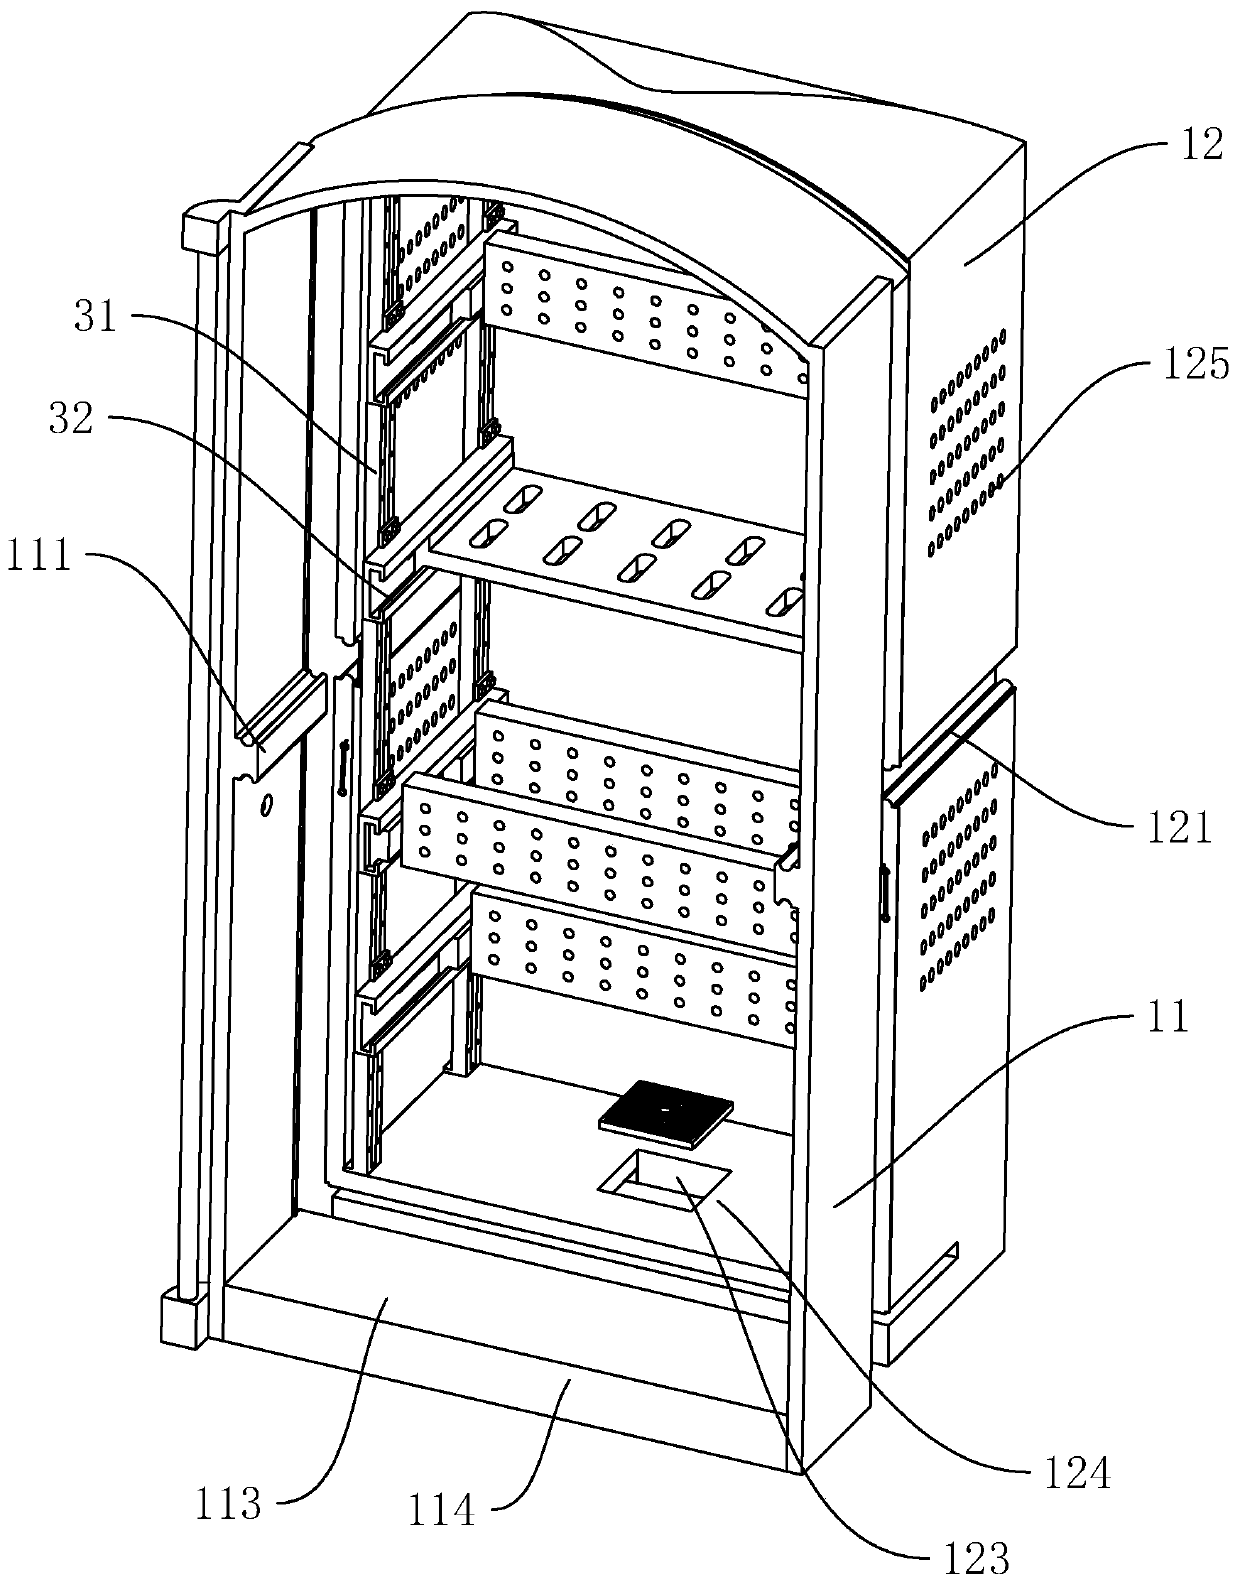 Power distribution cabinet convenient to install